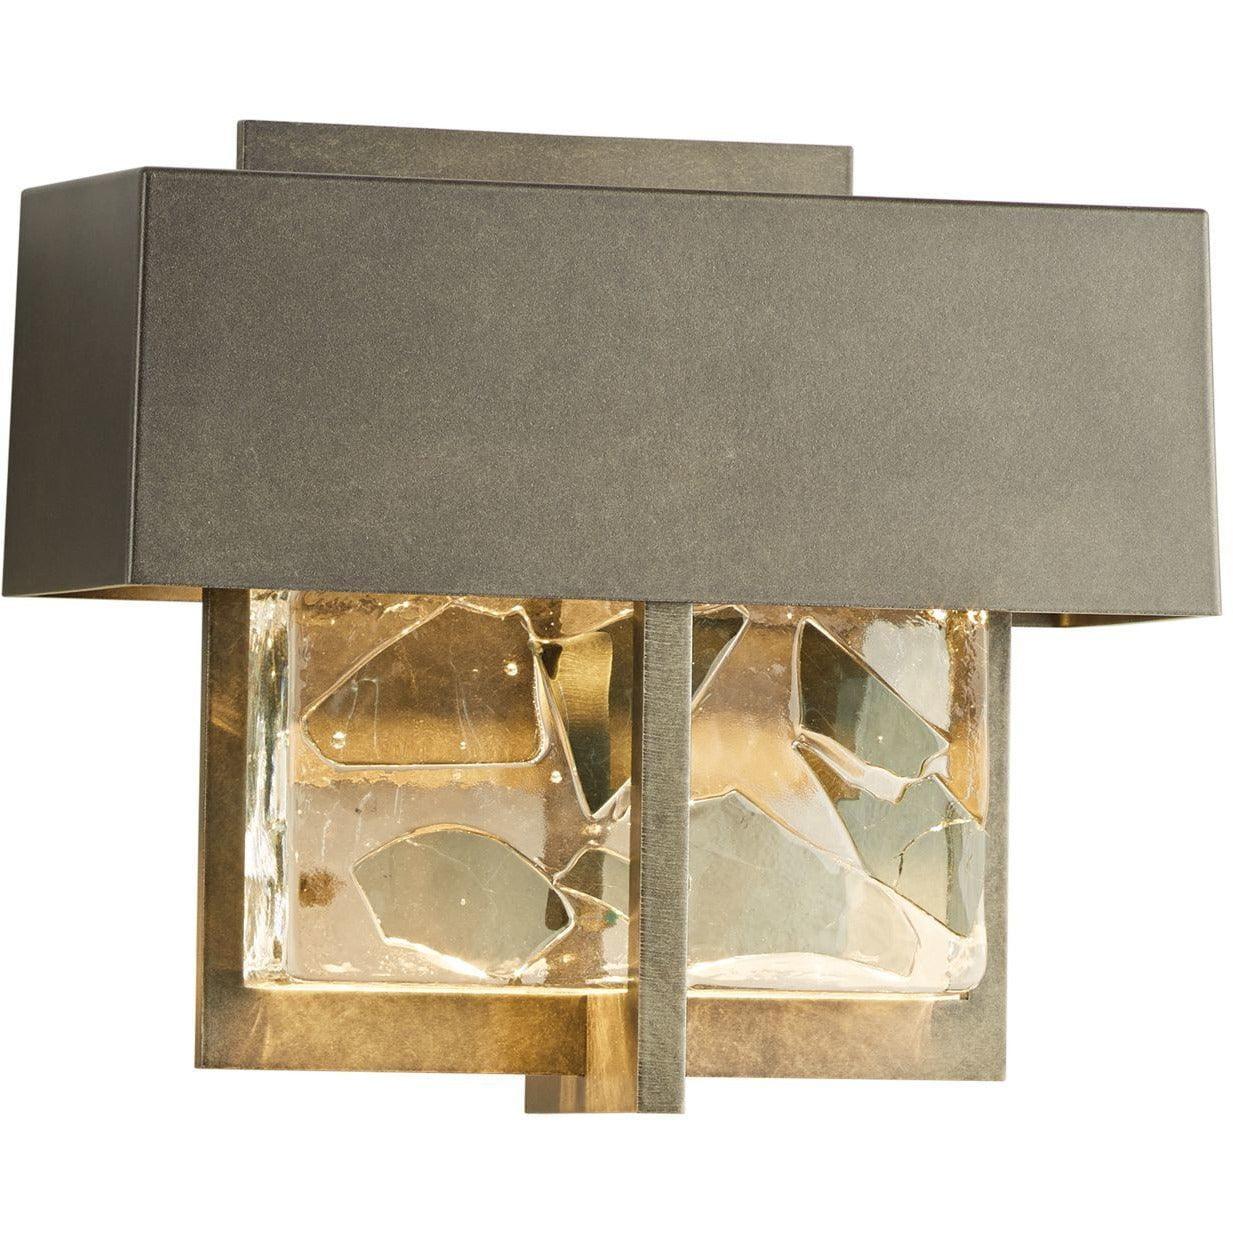 Hubbardton Forge - Shard 7-Inch LED Outdoor Wall Sconce - 302515-LED-78-YP0501 | Montreal Lighting & Hardware